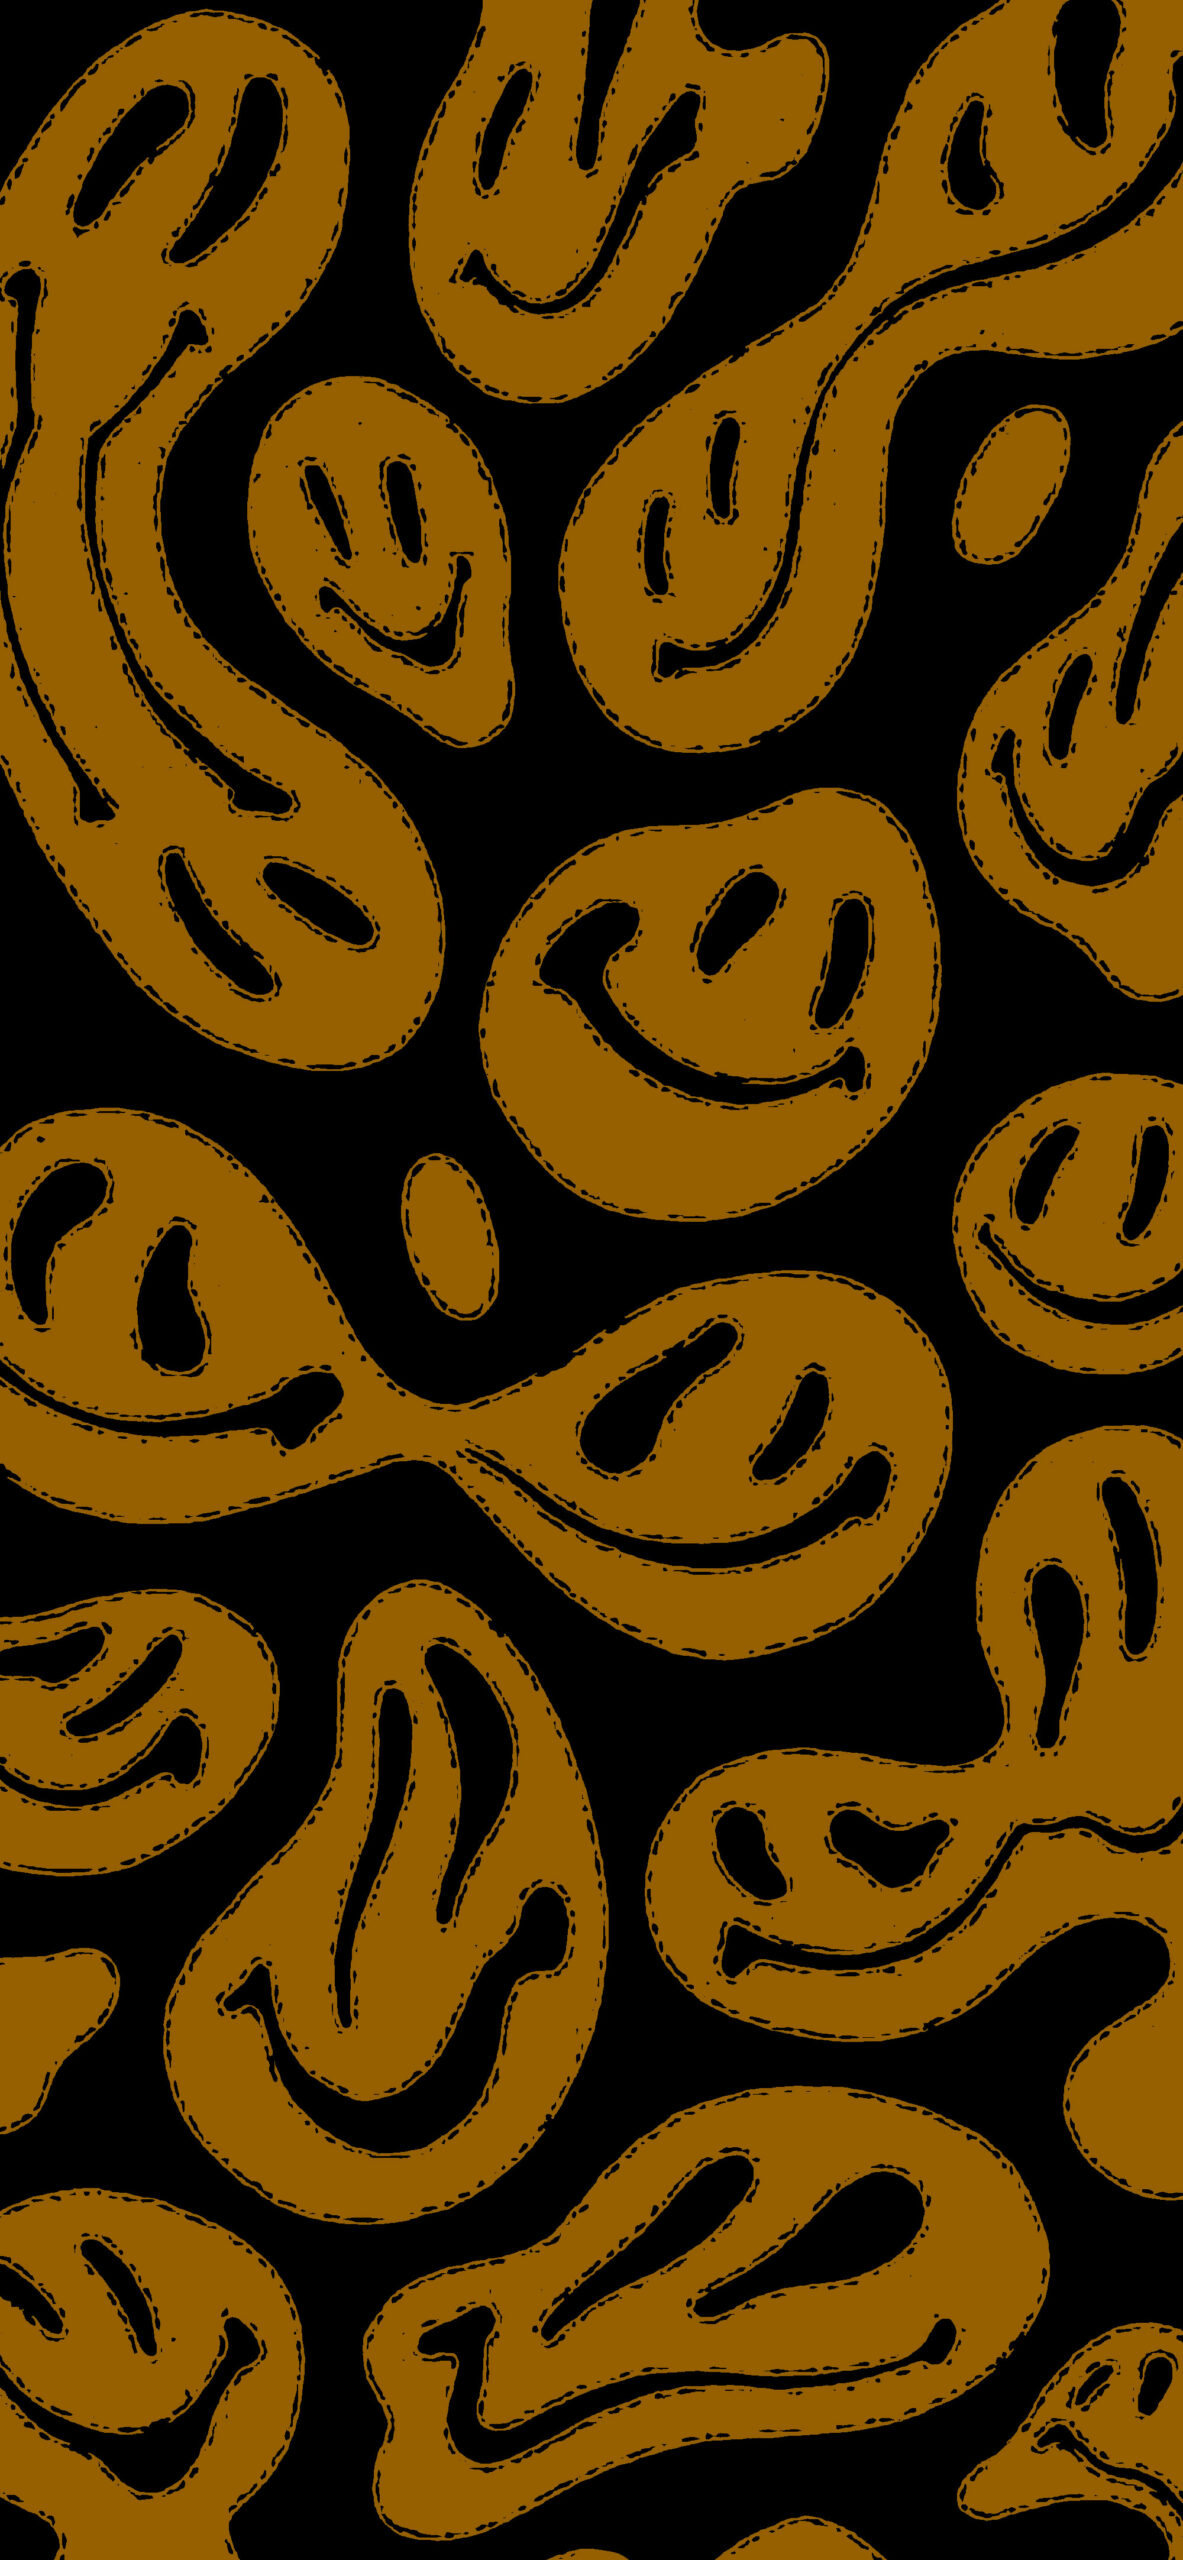 trippy smiley face black yellow background